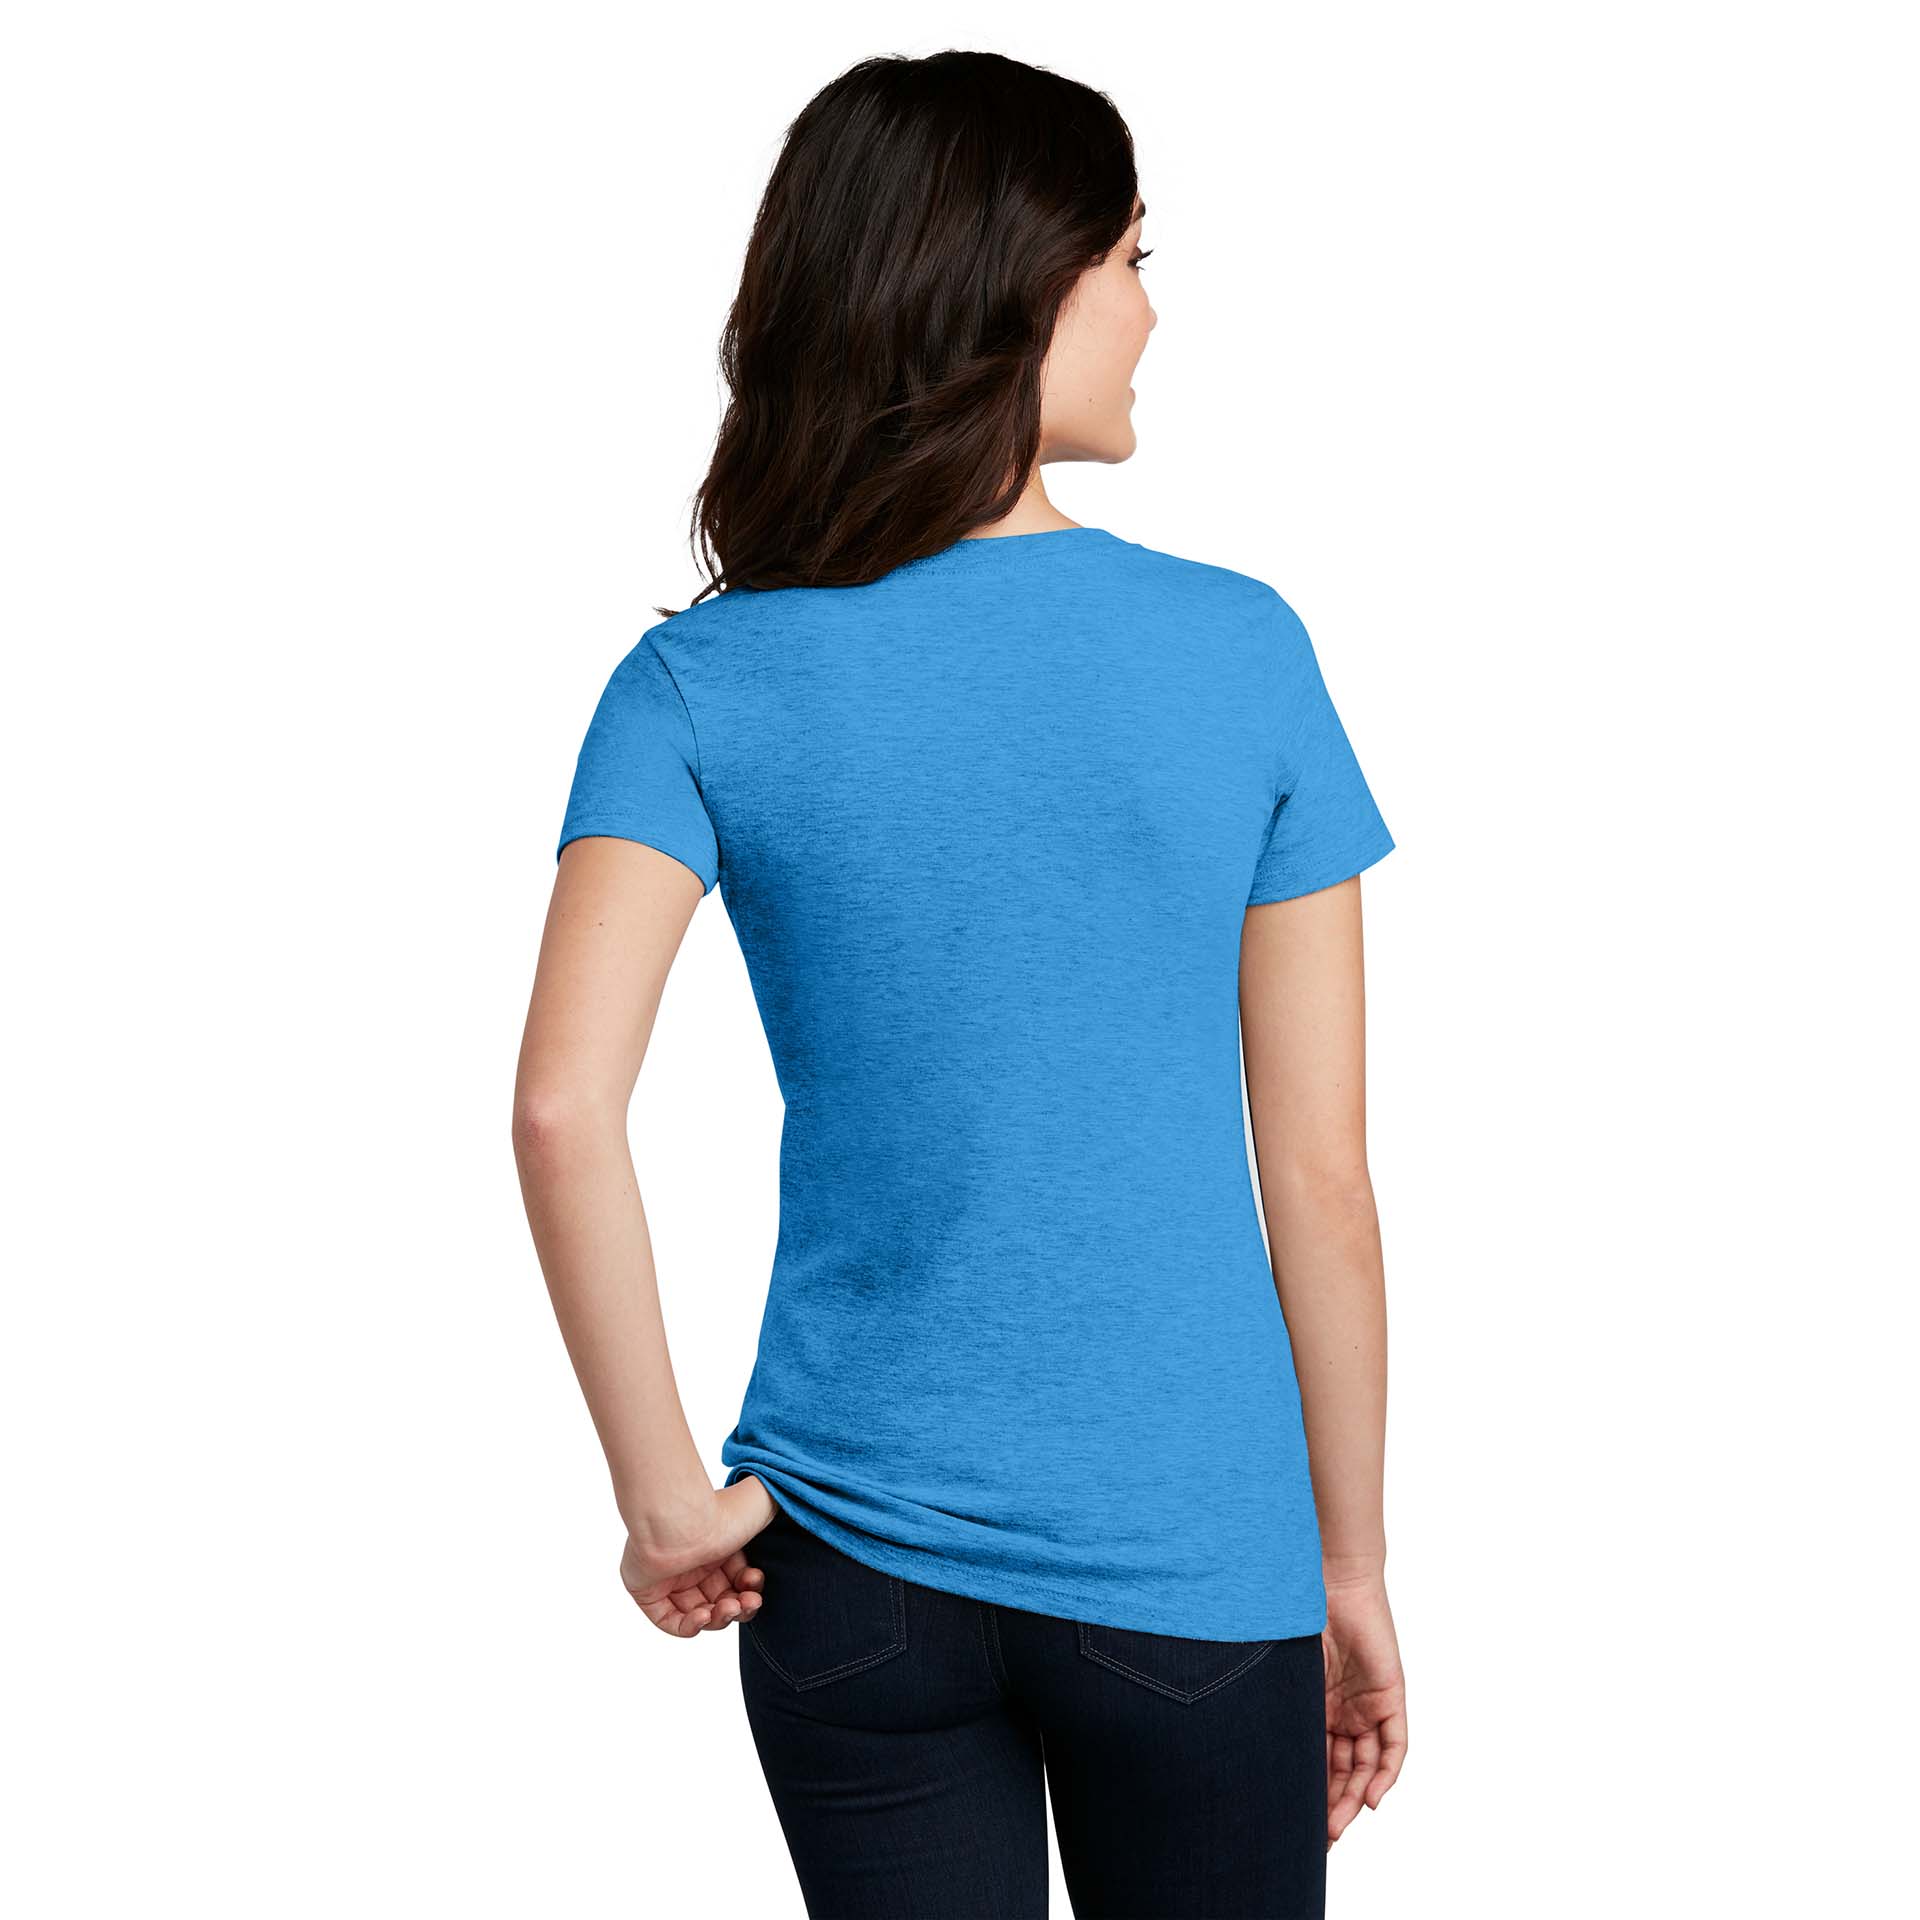 District DM1190L Women's Perfect Blend V-Neck Tee - Heathered Bright ...